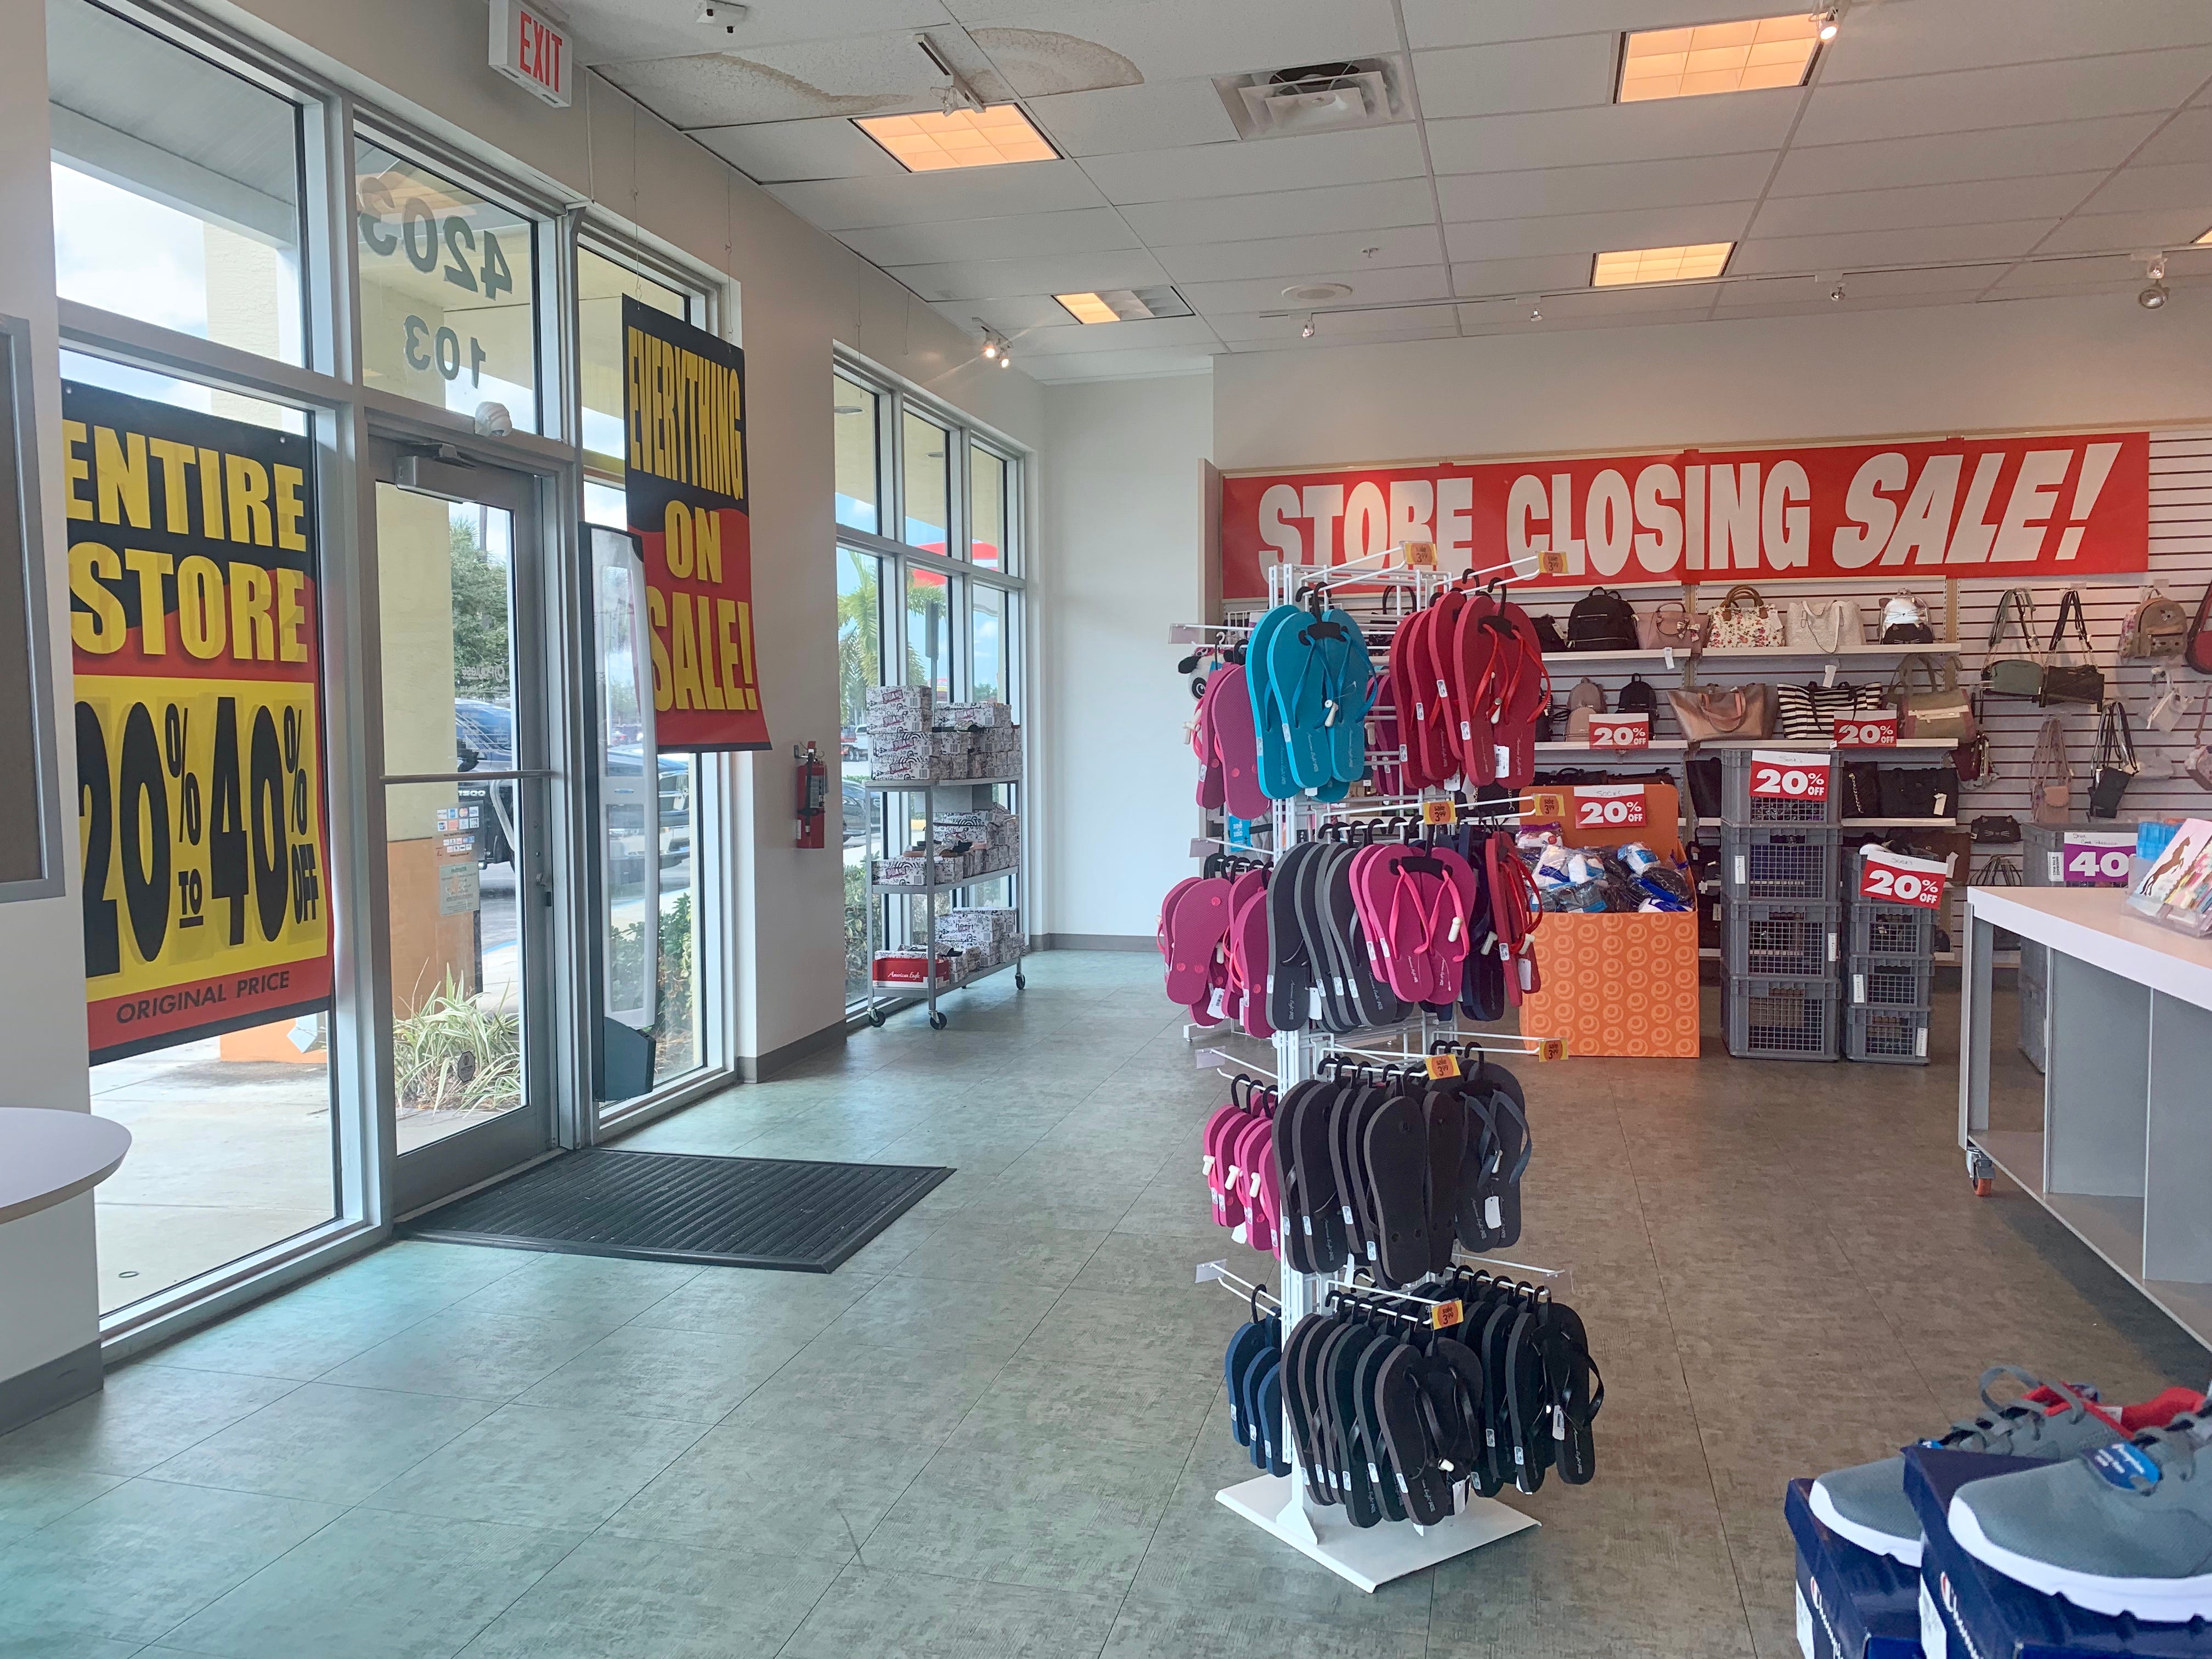 Payless closing 2019: List of stores 